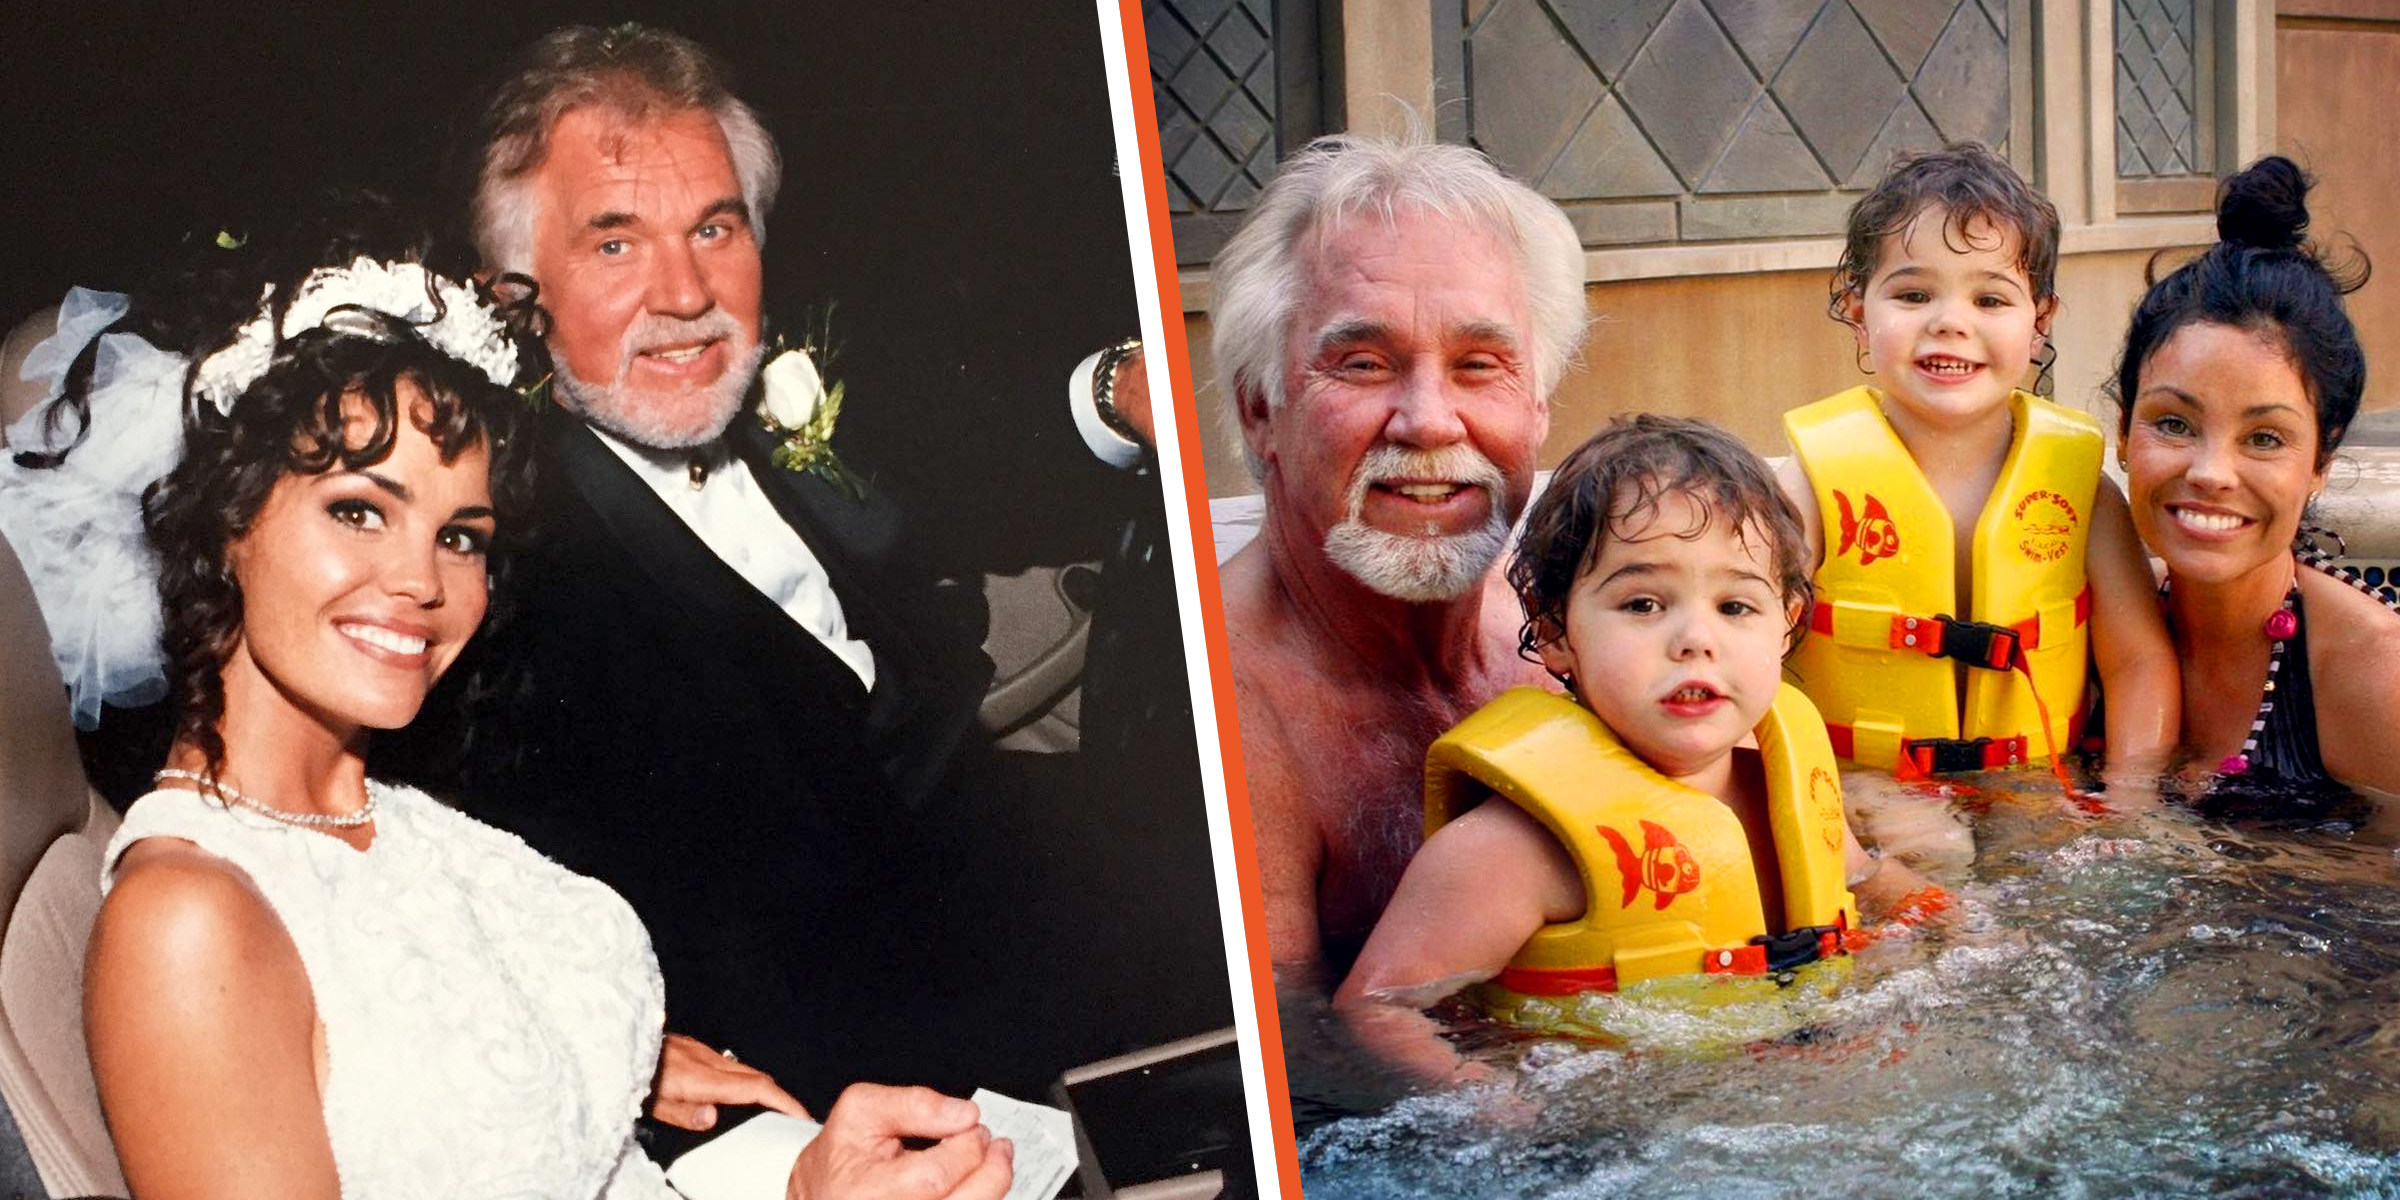 Kenny Rogers and Wanda Miller | Kenny, Justin, and Jordan Rogers and Wanda Miller | Source: Instagram.com/@_kennyrogers